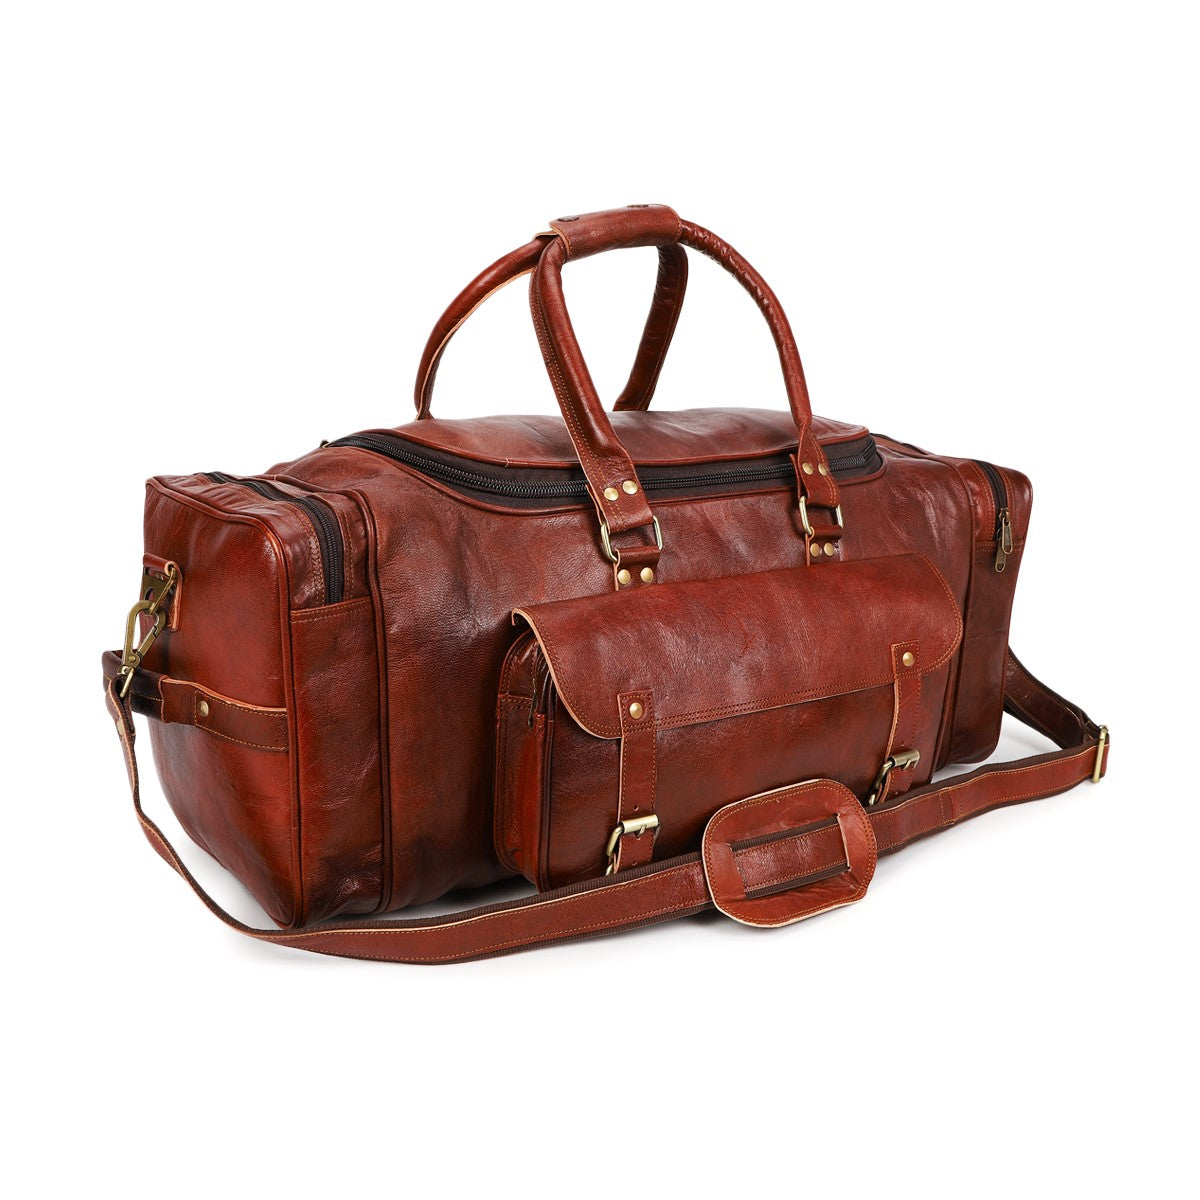 Leather Duffel Bag For Gym & Travel